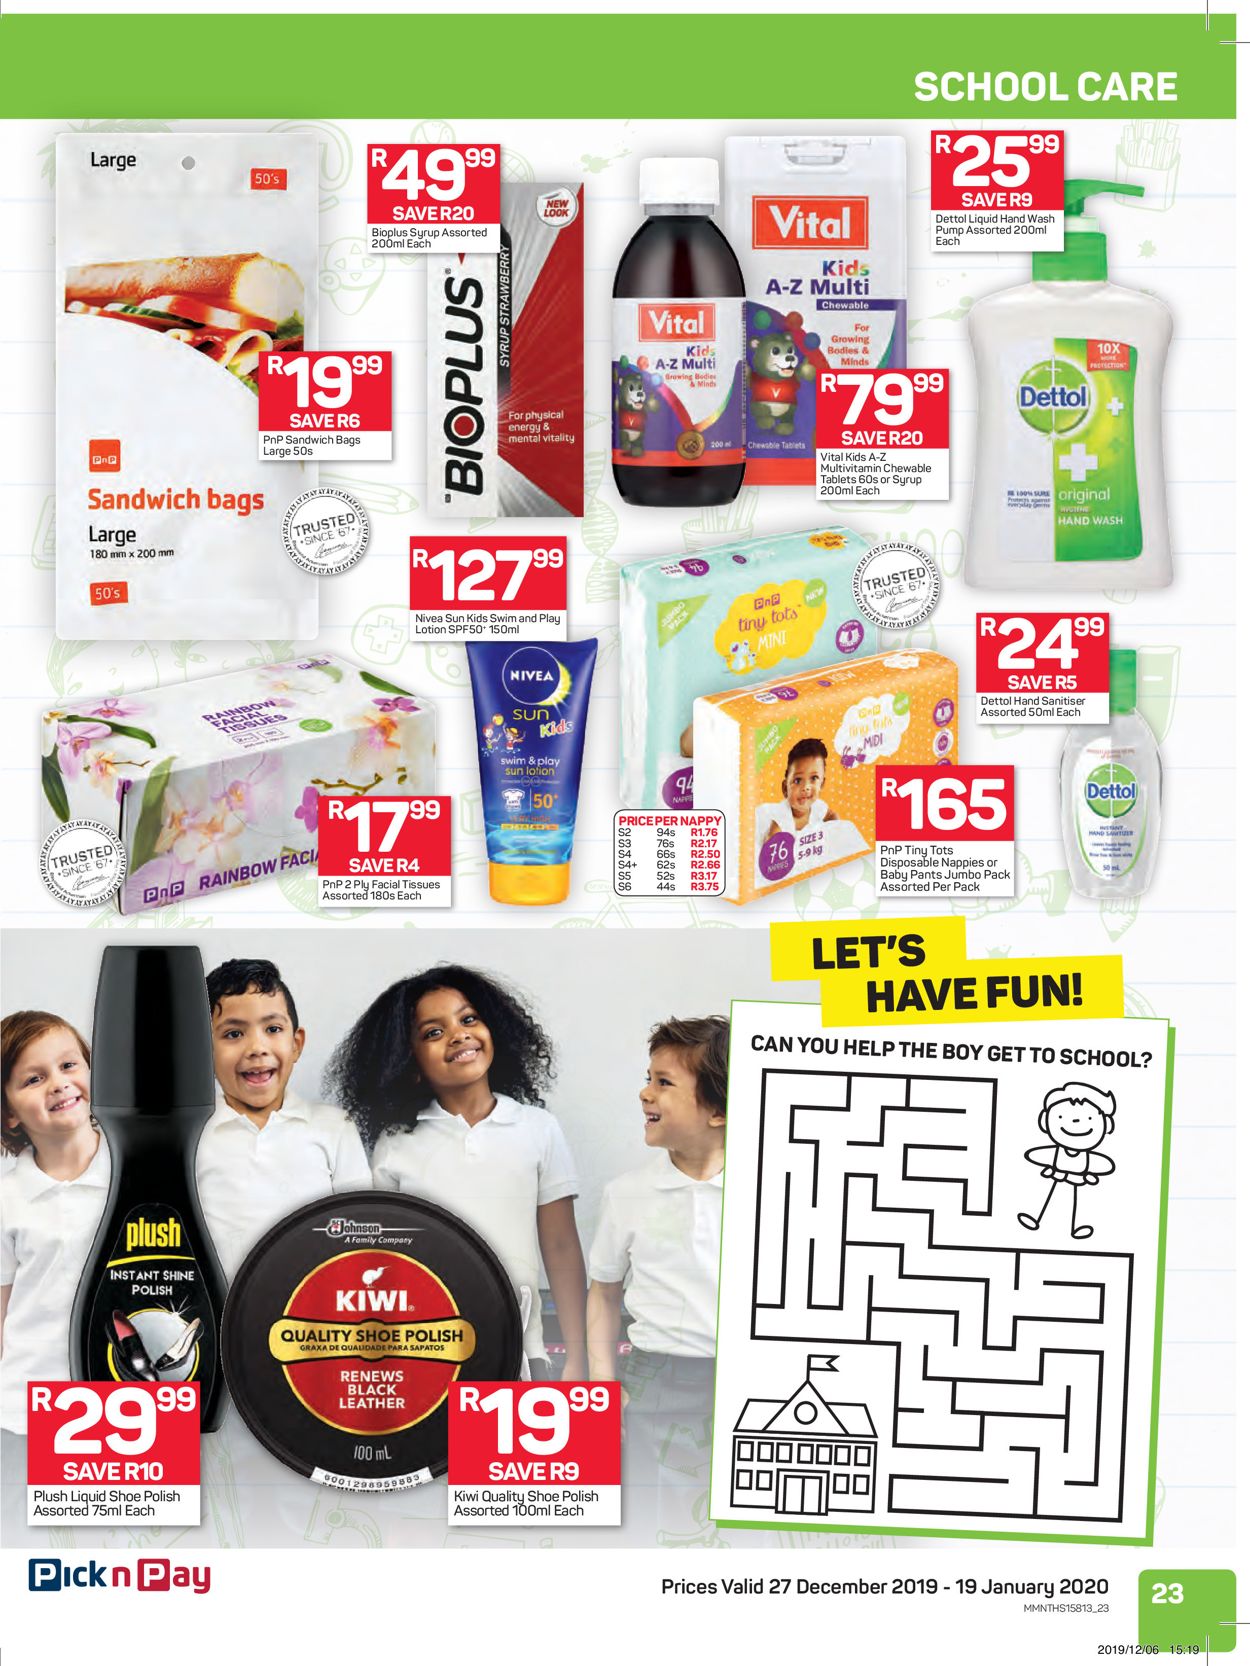 Pick n Pay Back 2 School Catalogue - 2019/12/27-2020/01/19 (Page 24)